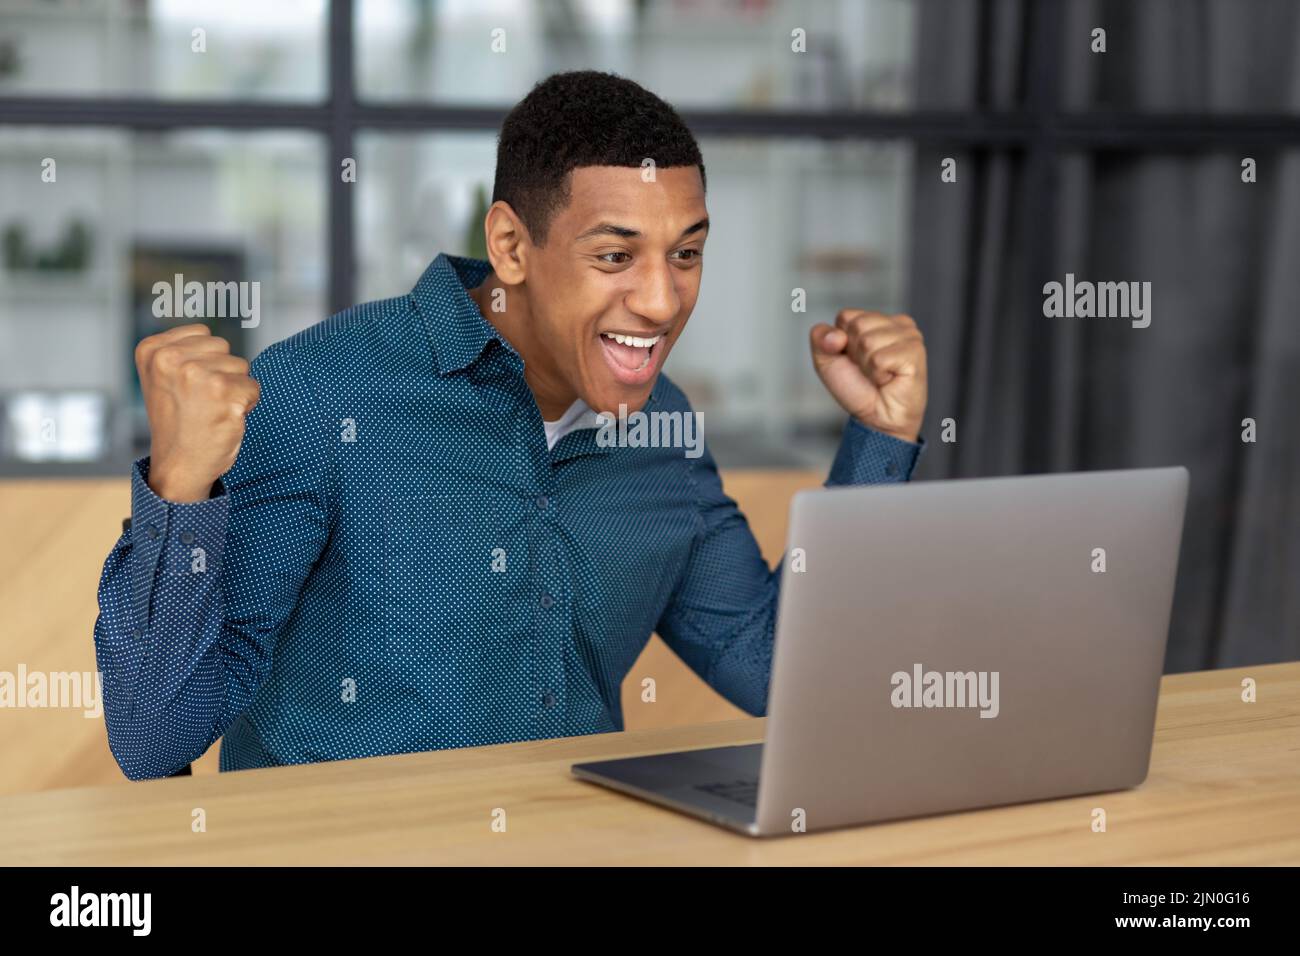 Portrait of excited young African American man celebrating success Happy businessperson male having good news Stock Photo